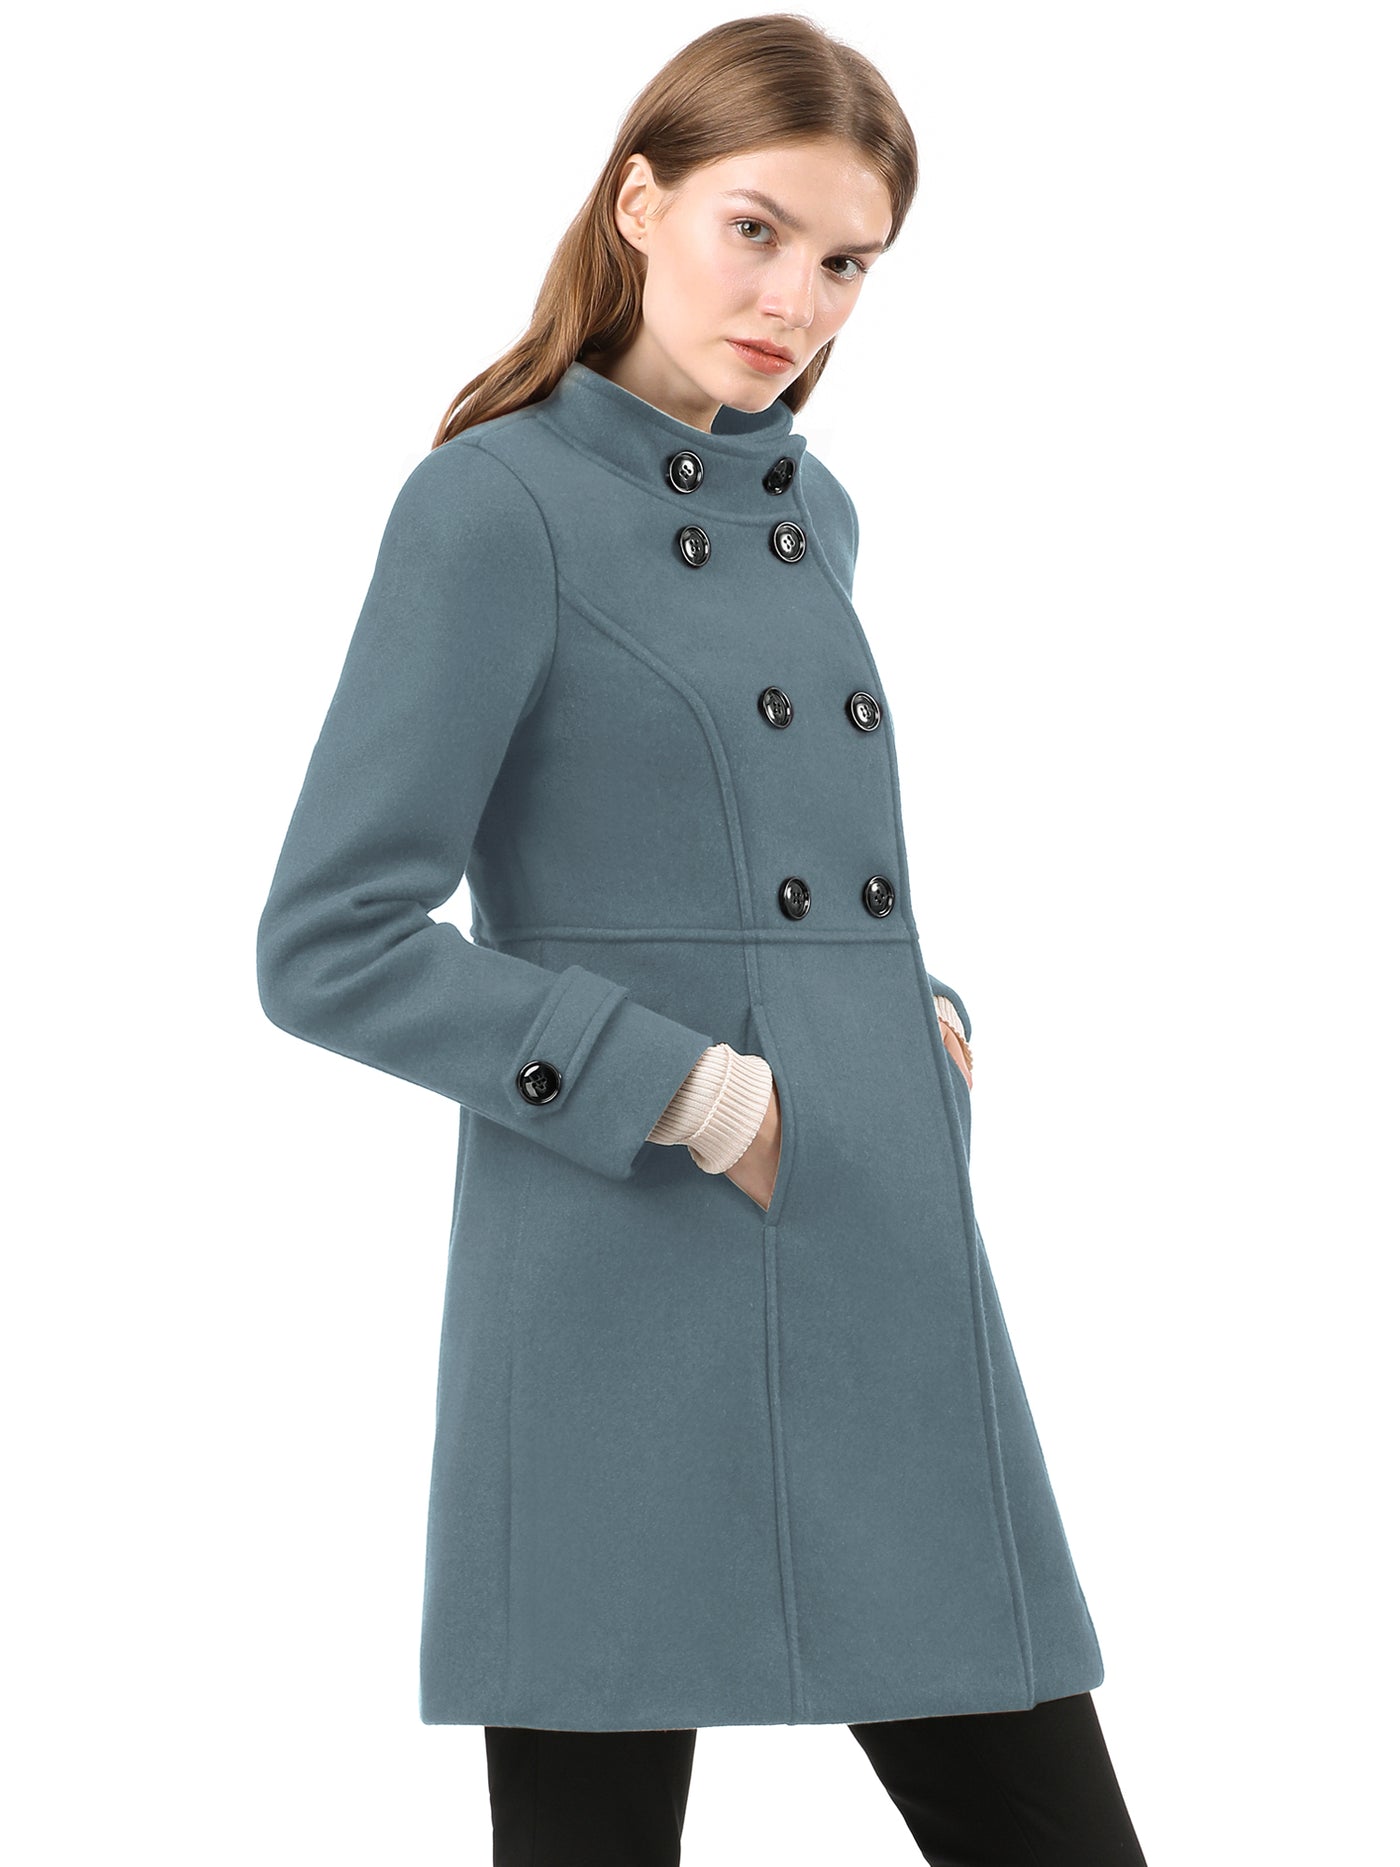 Allegra K Stand Collar Double Breasted Slant Pockets Trendy Outwear Winter Coat